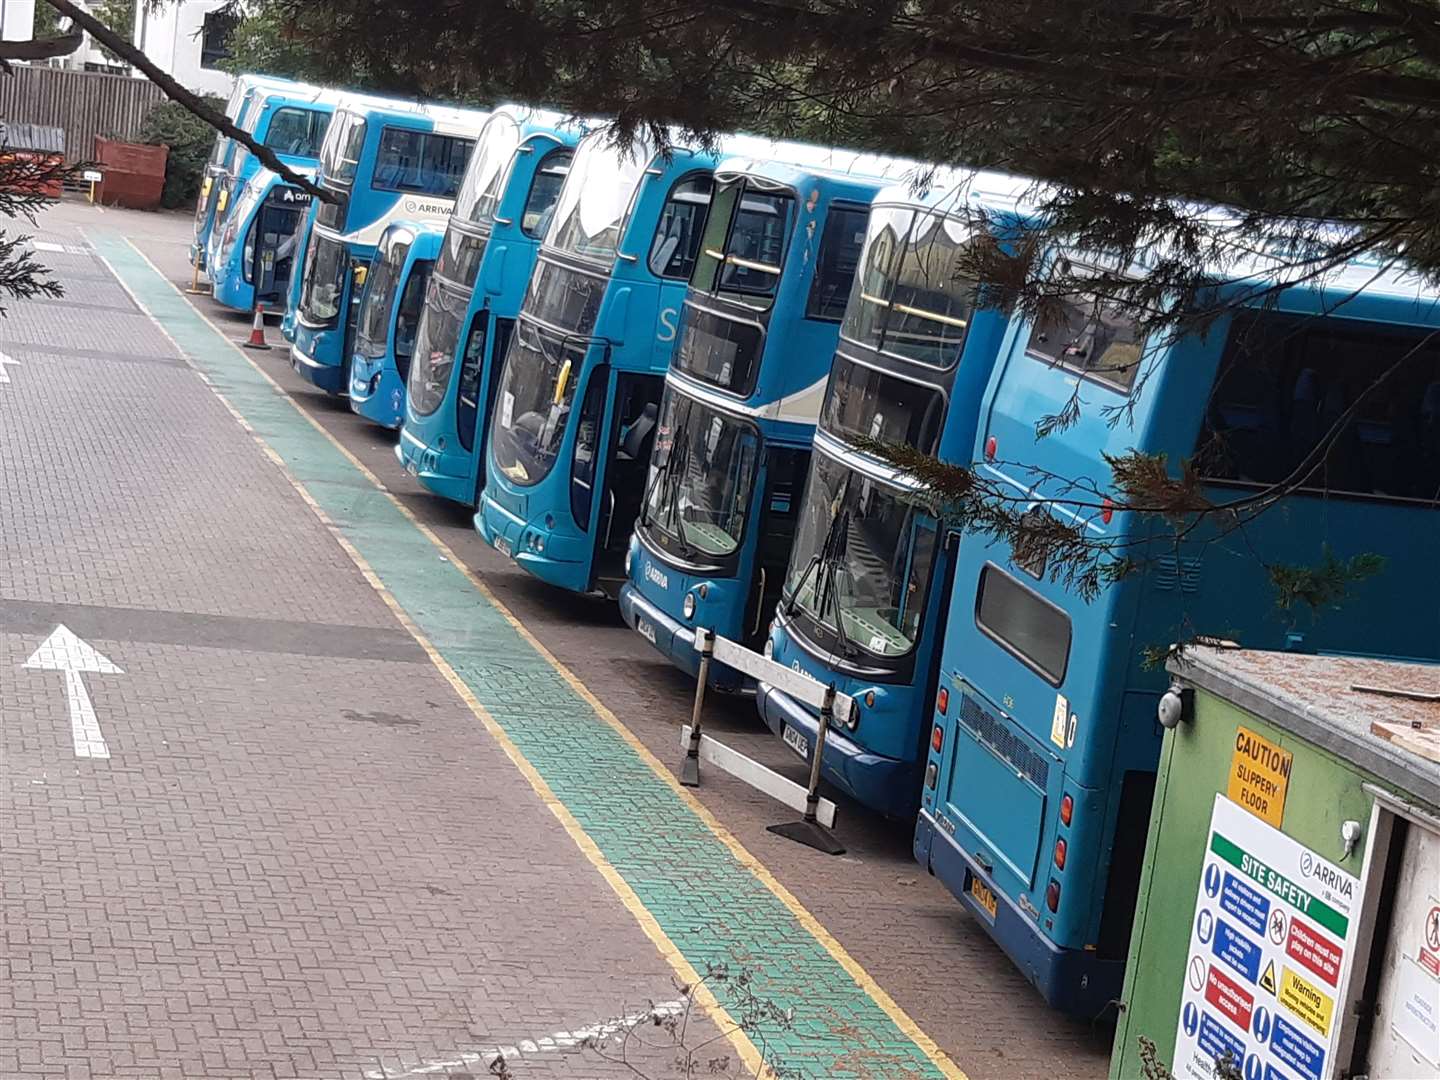 Arriva buses across Kent could come to a standstill